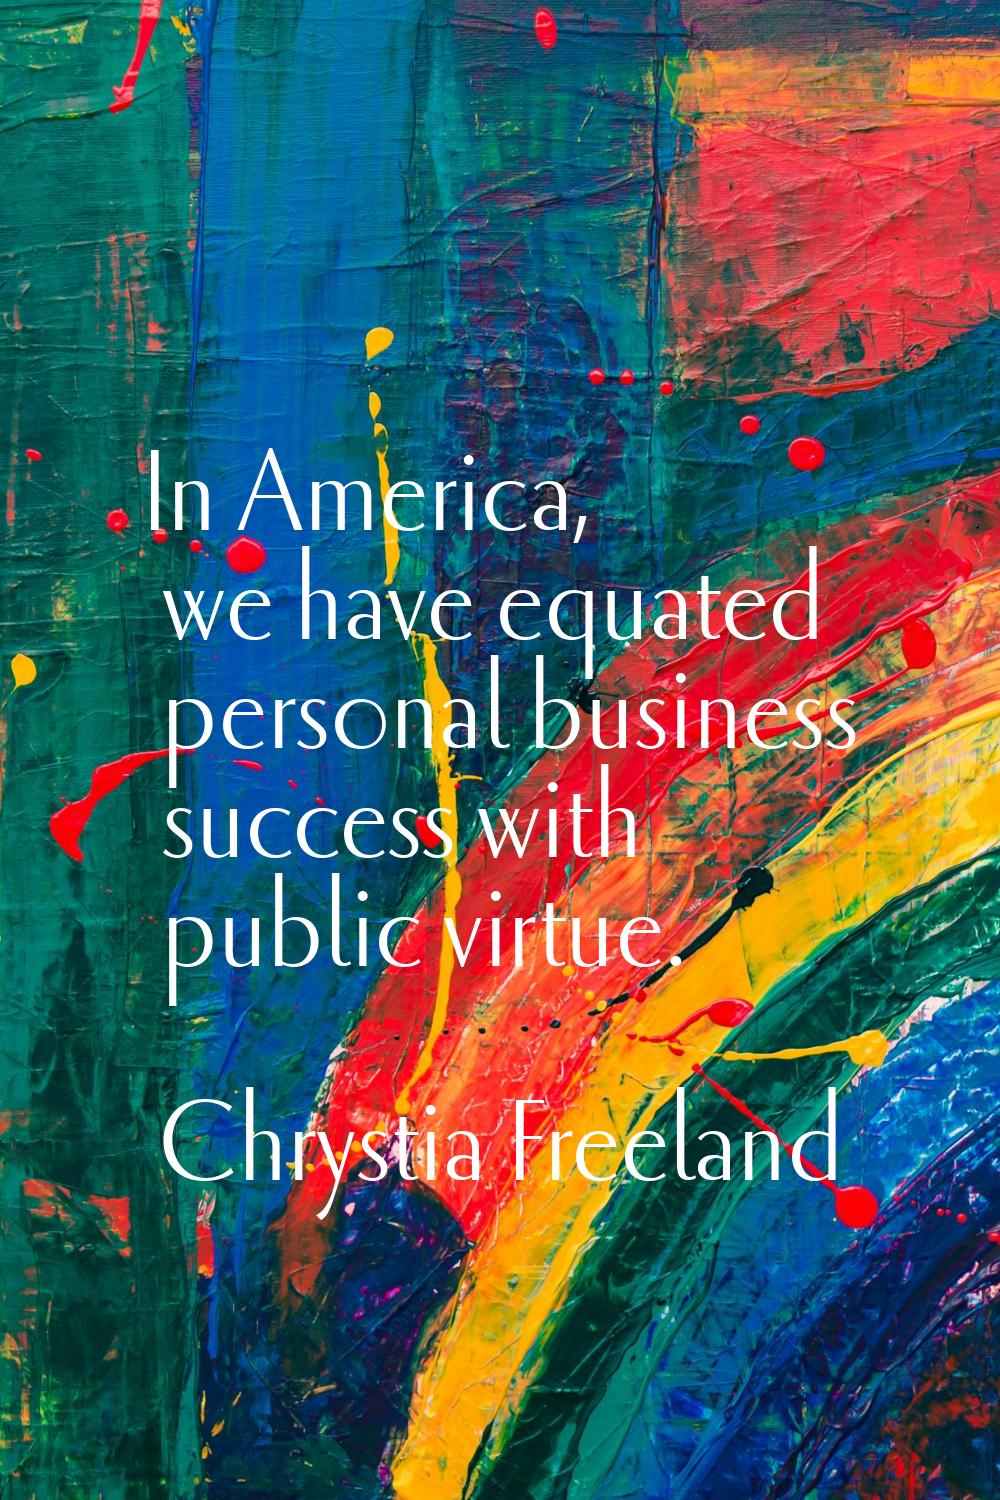 In America, we have equated personal business success with public virtue.